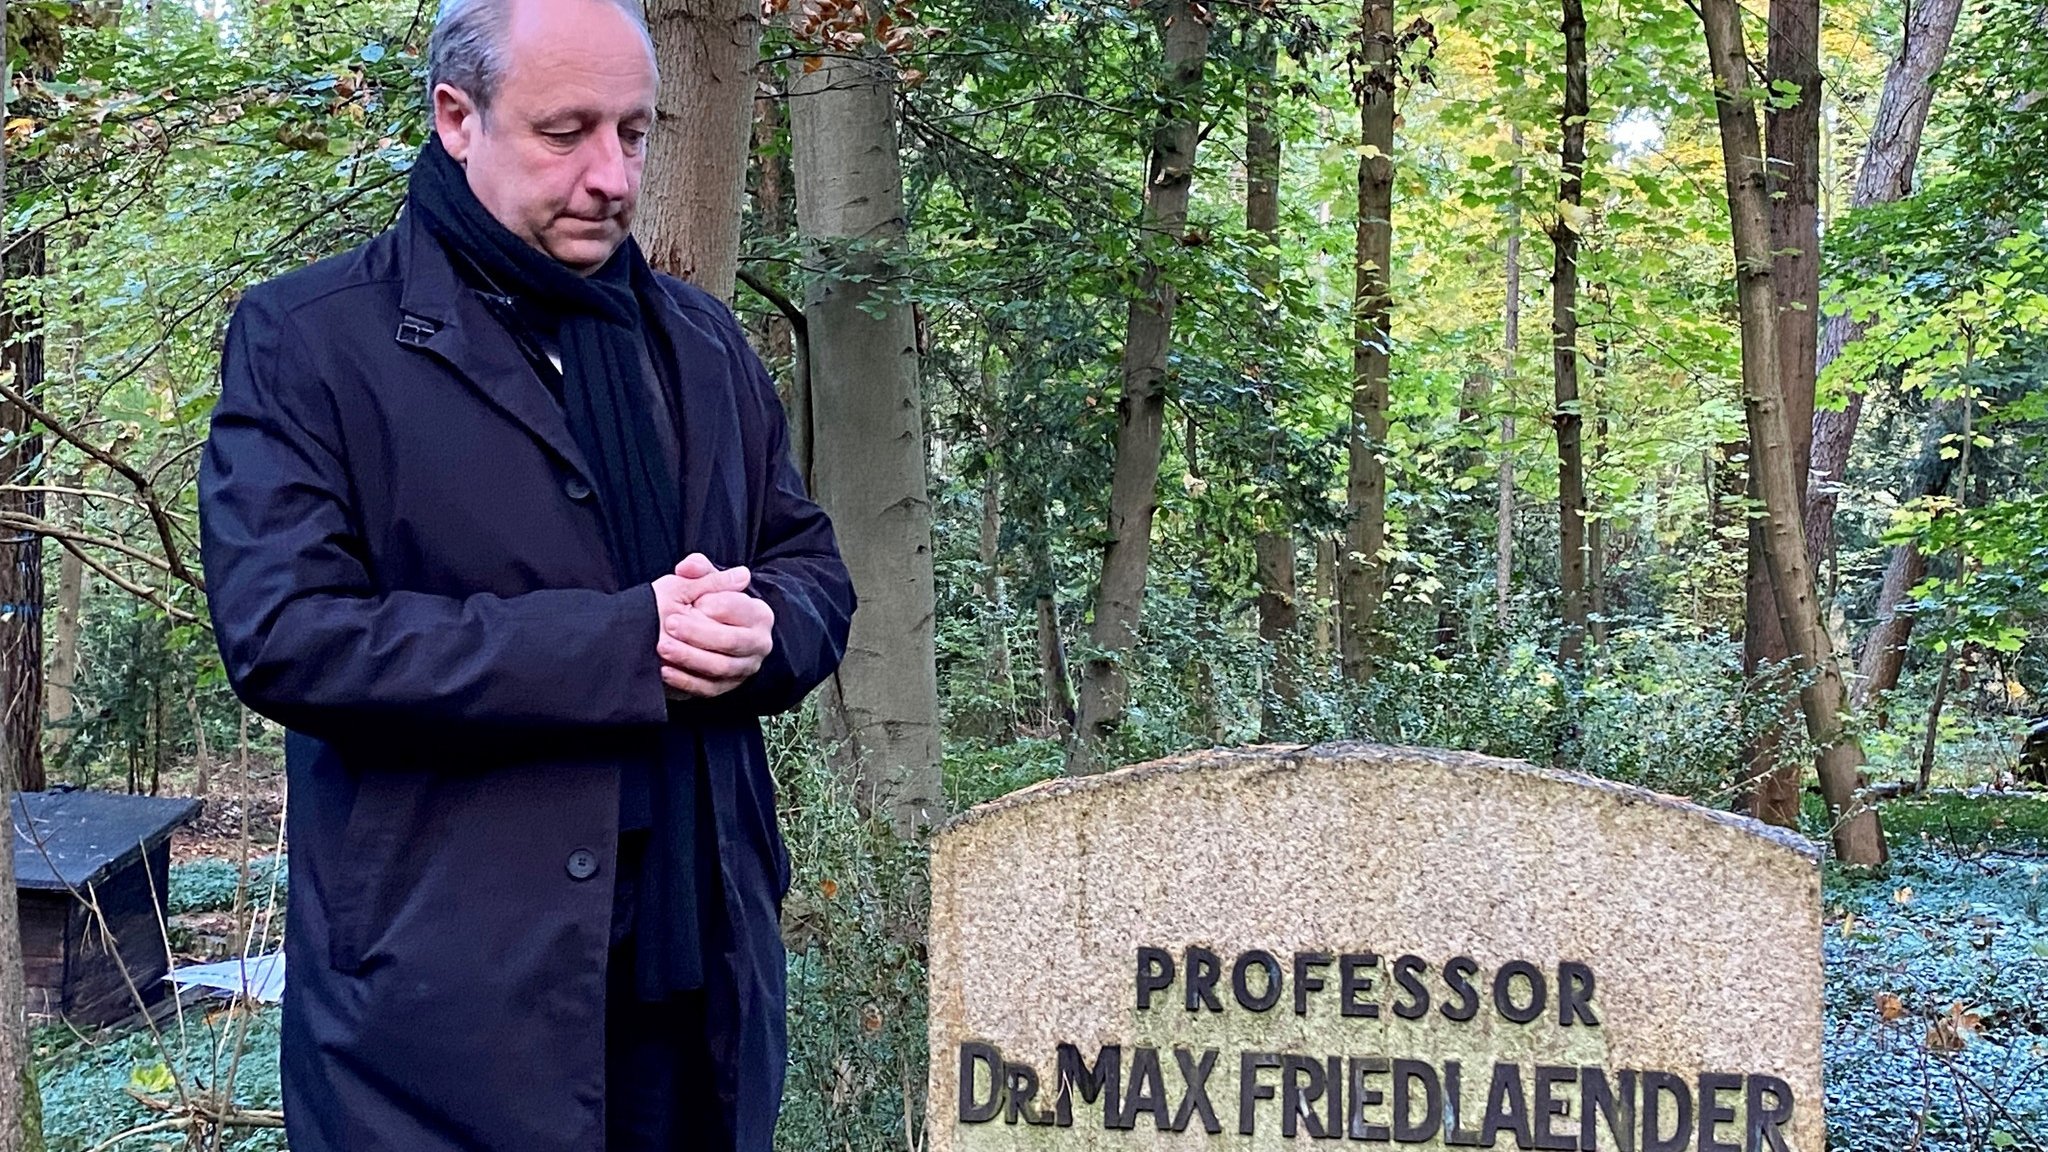 Bishop Christian Stäblein visiting the grave site at the cemetery in Stahnsdorf (12/10/21)